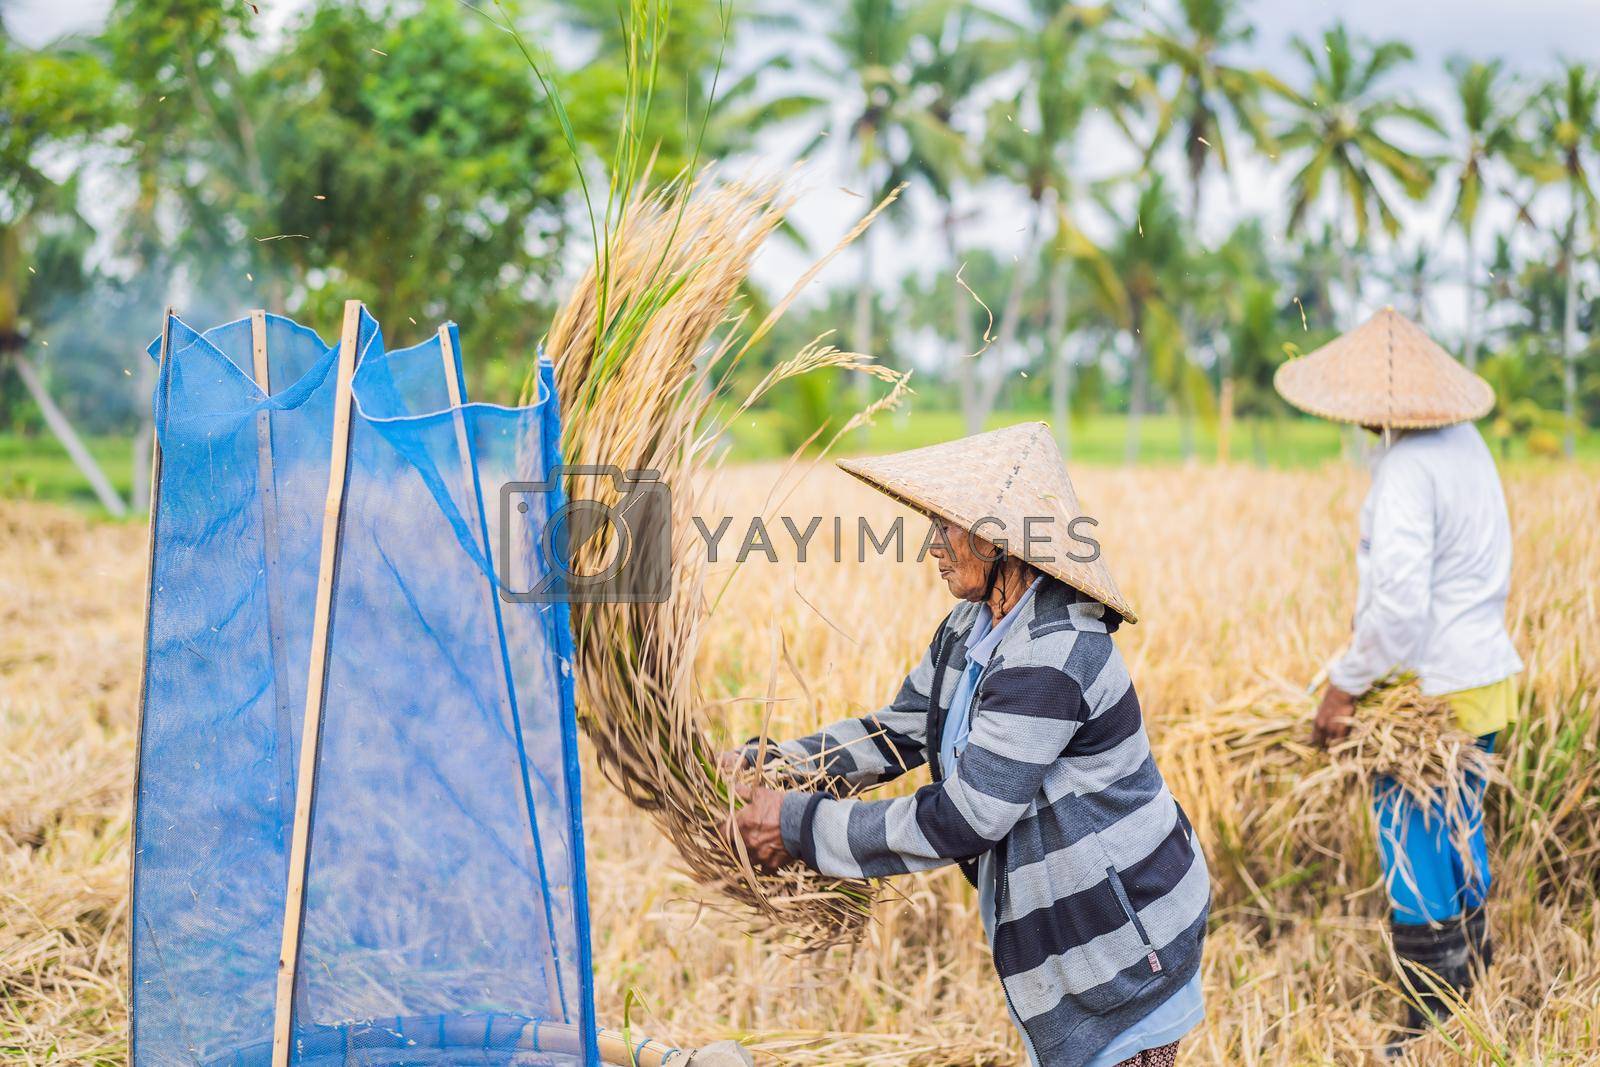 May 23, 2019, Indonesia, Bali: Indonesian farmer man sifting rice in the fields of Ubud, Bali. A common practice done in rural China, Vietnam, Thailand, Myanmar, Philippines.